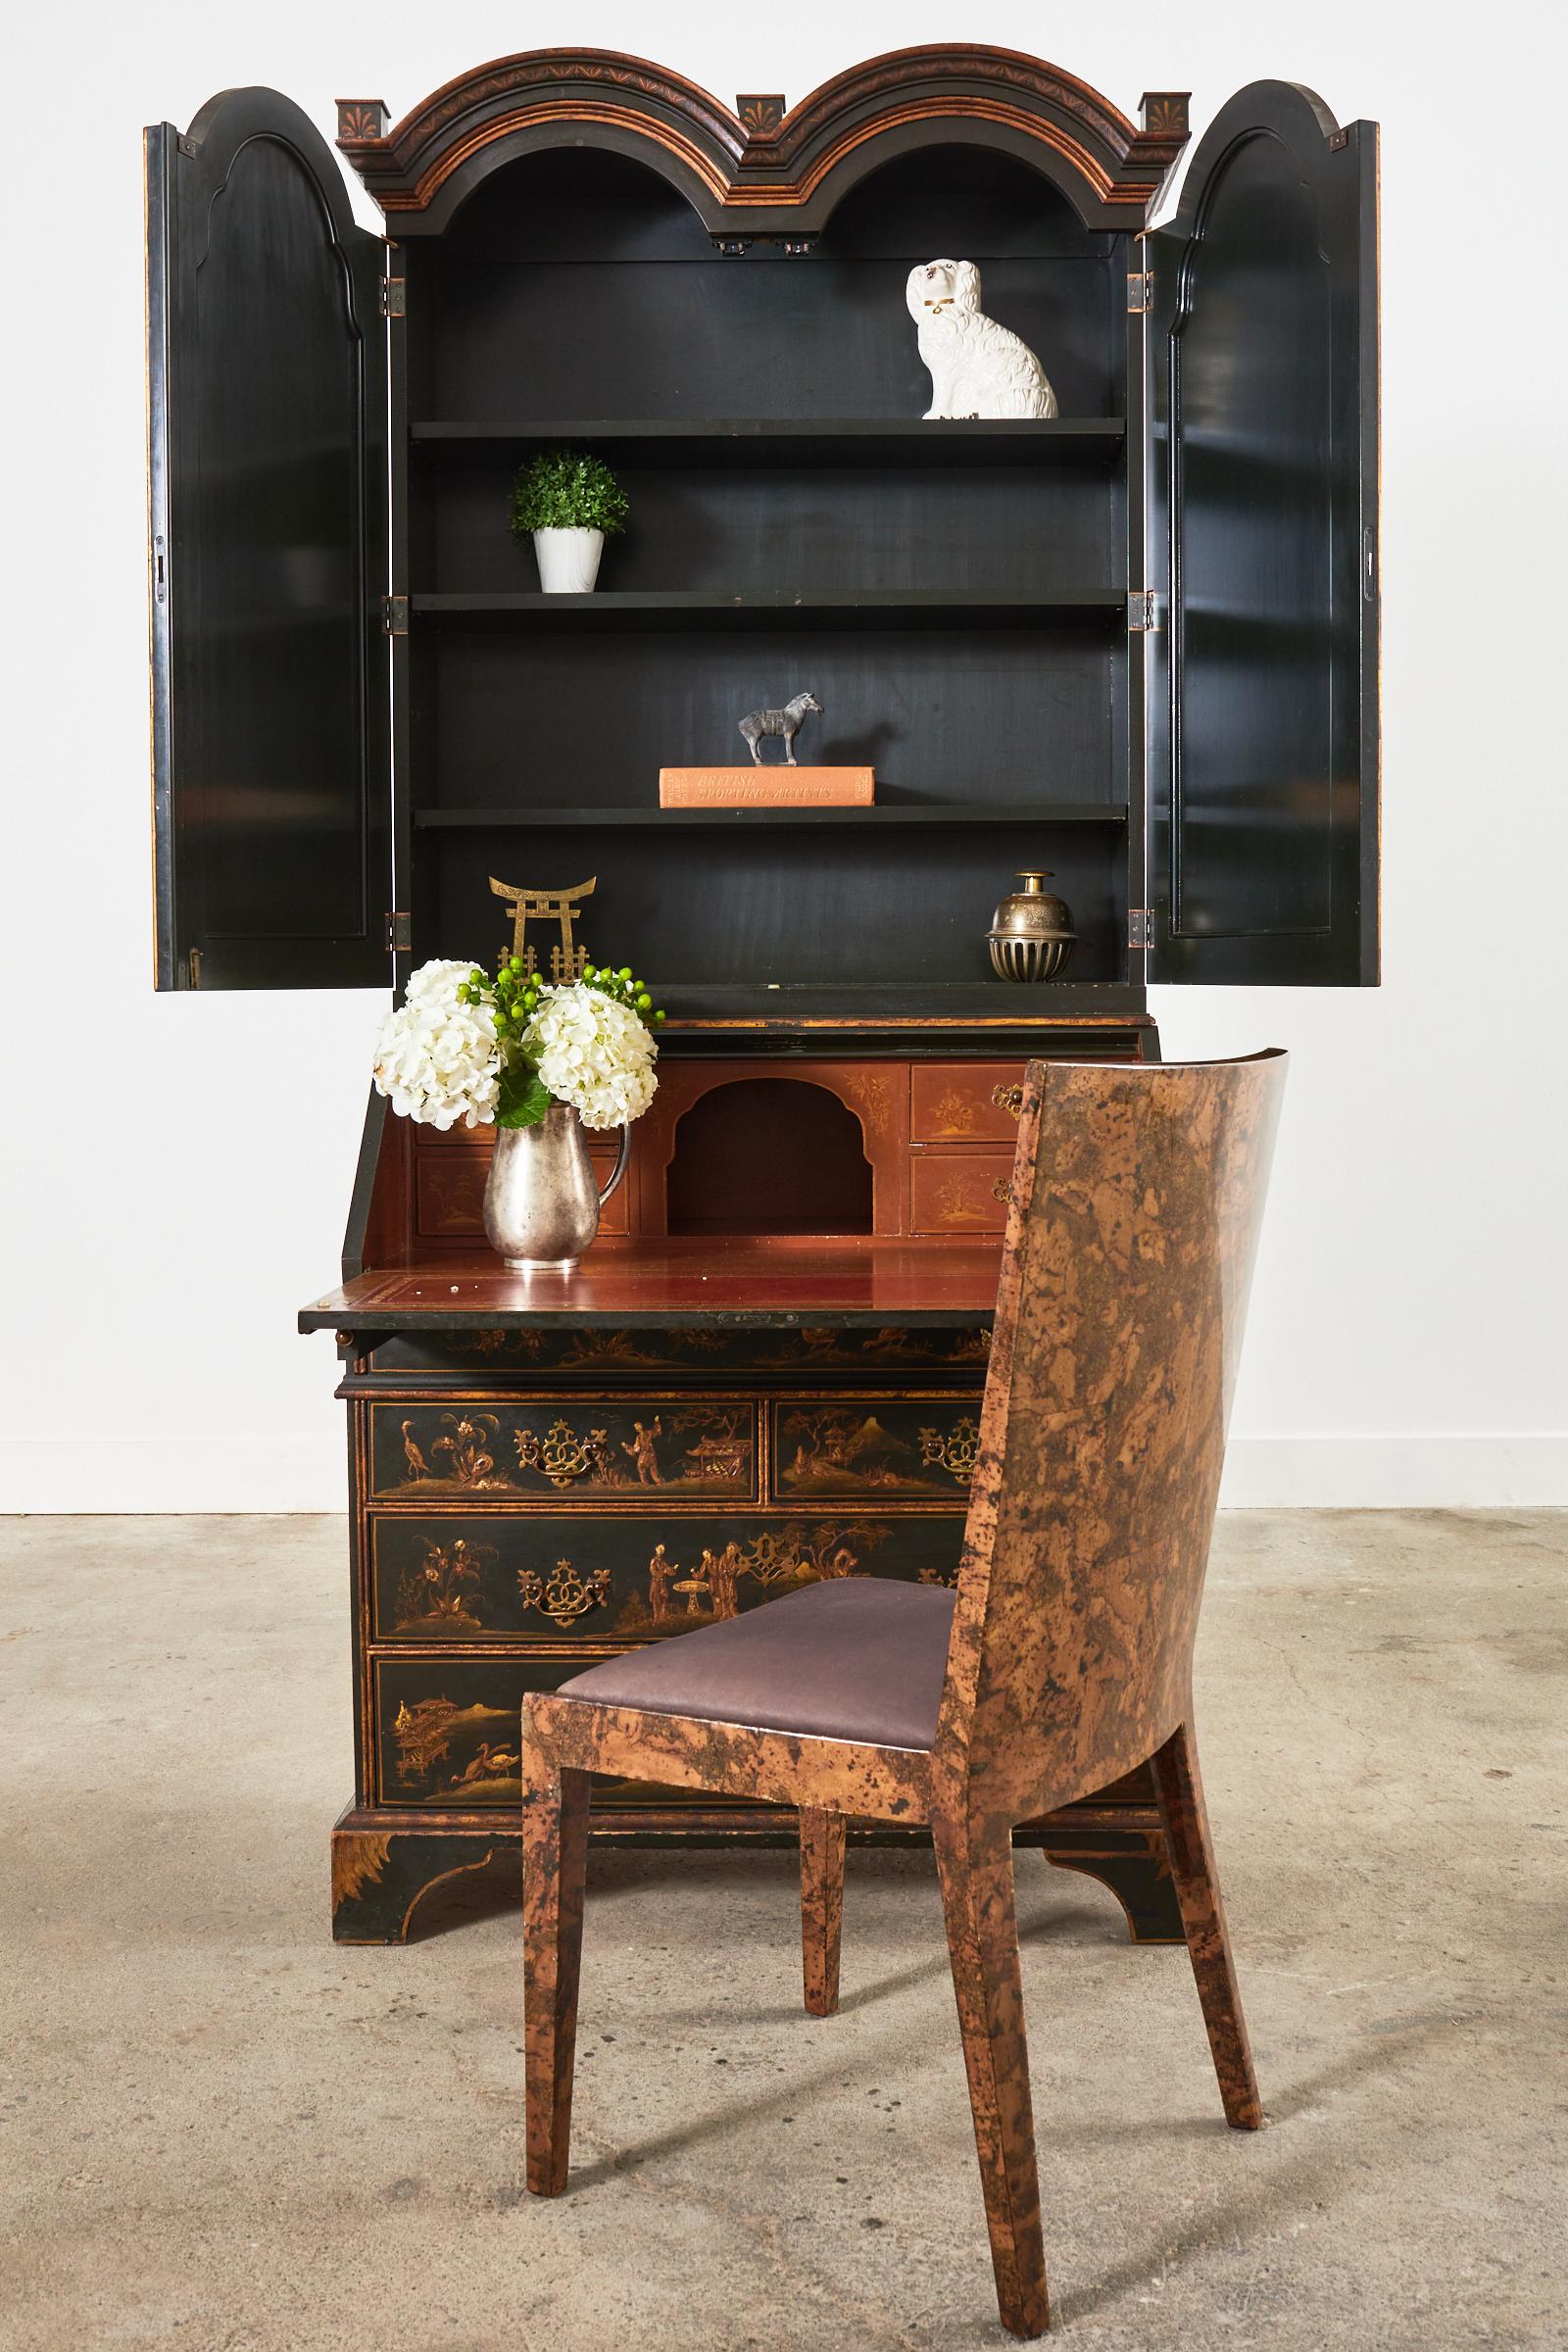 Handsome English Georgian style secretaire bookcase cabinet made by Baker Furniture. The two-part secretary features a dark green lacquered case embellished with parcel gilt Chinoiserie reserves. The top portion is fronted by two large arched doors